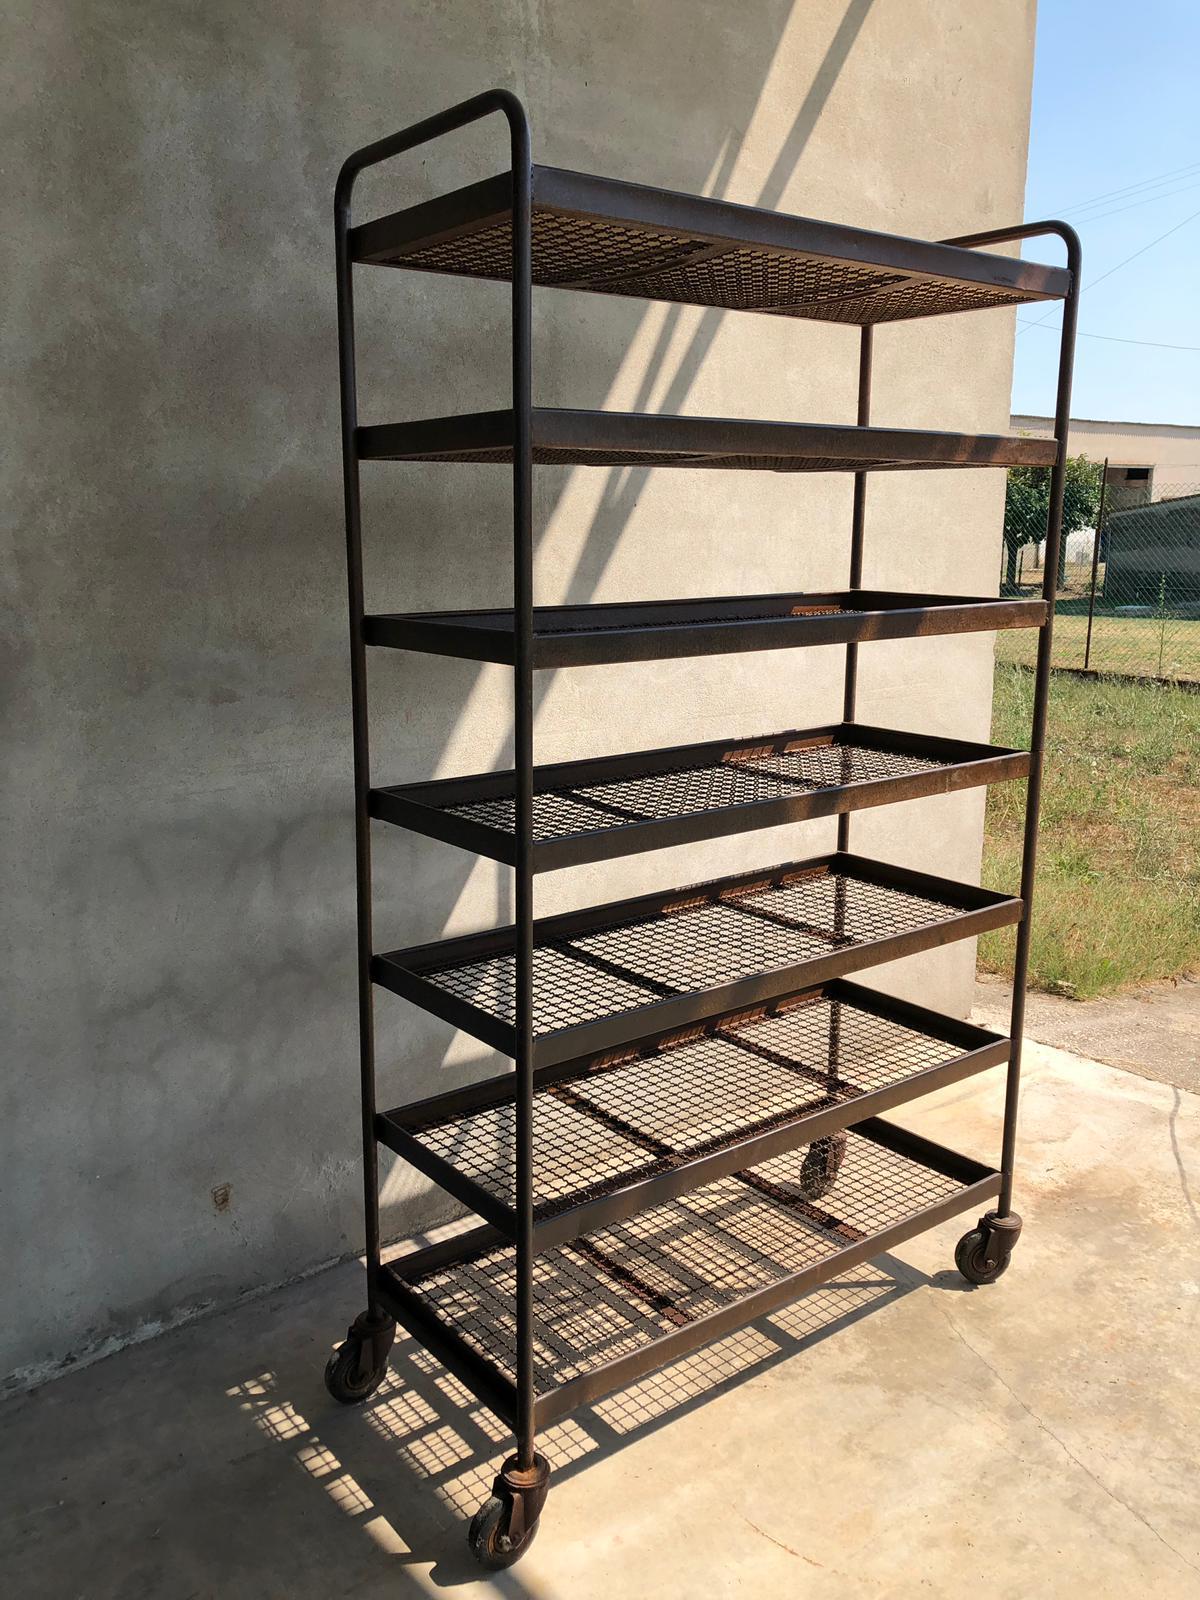 Seven shelves industrial iron wheeled trolleys. Size: H 215 cm, D 51 cm, W 120 cm. Quantity available n 7.

Industrial iron wheeled trays with or without wooden shelves. From Italy from midcentury period.
Trolleys are made of industrial tubular iron